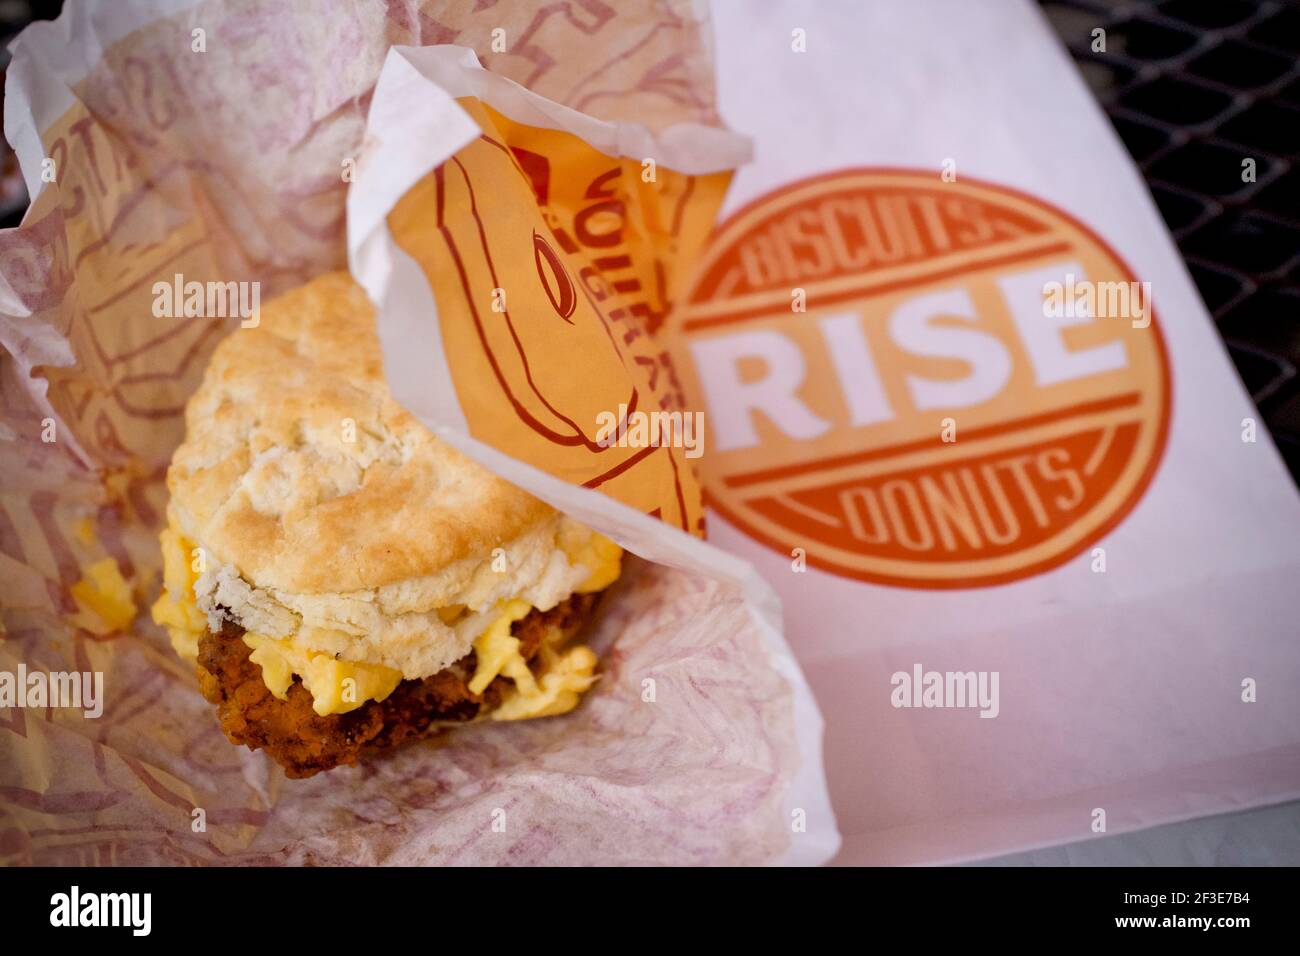 Rise Donuts and Chicken Sandwiches on Southern Biscuits, Durham, North Carolina, USA Foto Stock